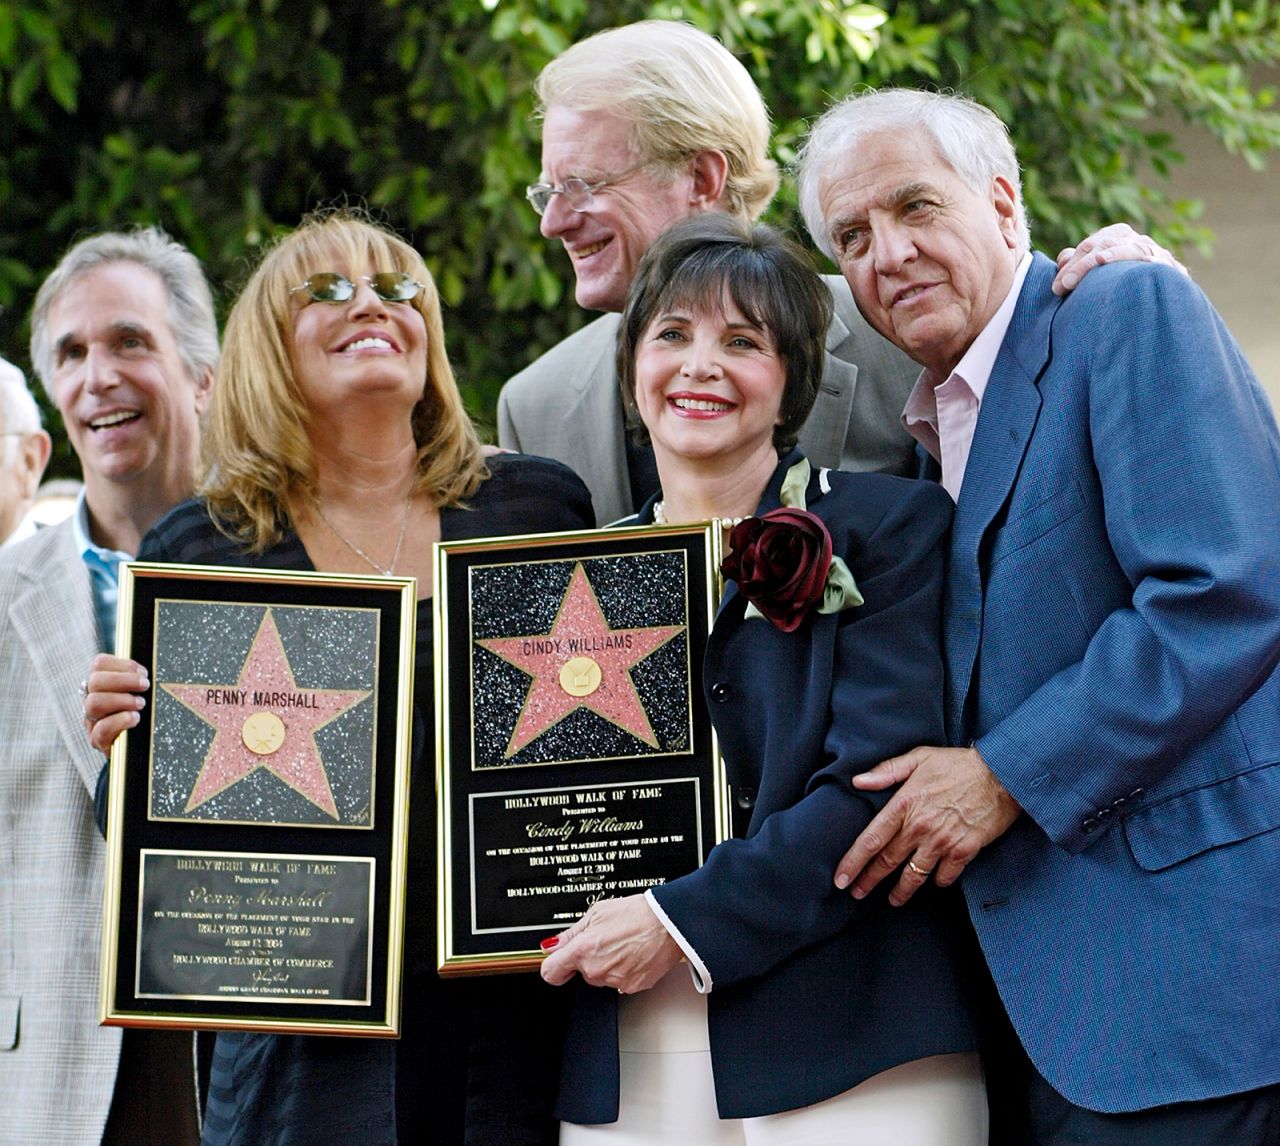 Winkler, Marshall, Ed Begley, Williams and Garry Marshall pose after Penny Marshall and Williams received their stars on the Hollywood Walk of Fame in 2004.